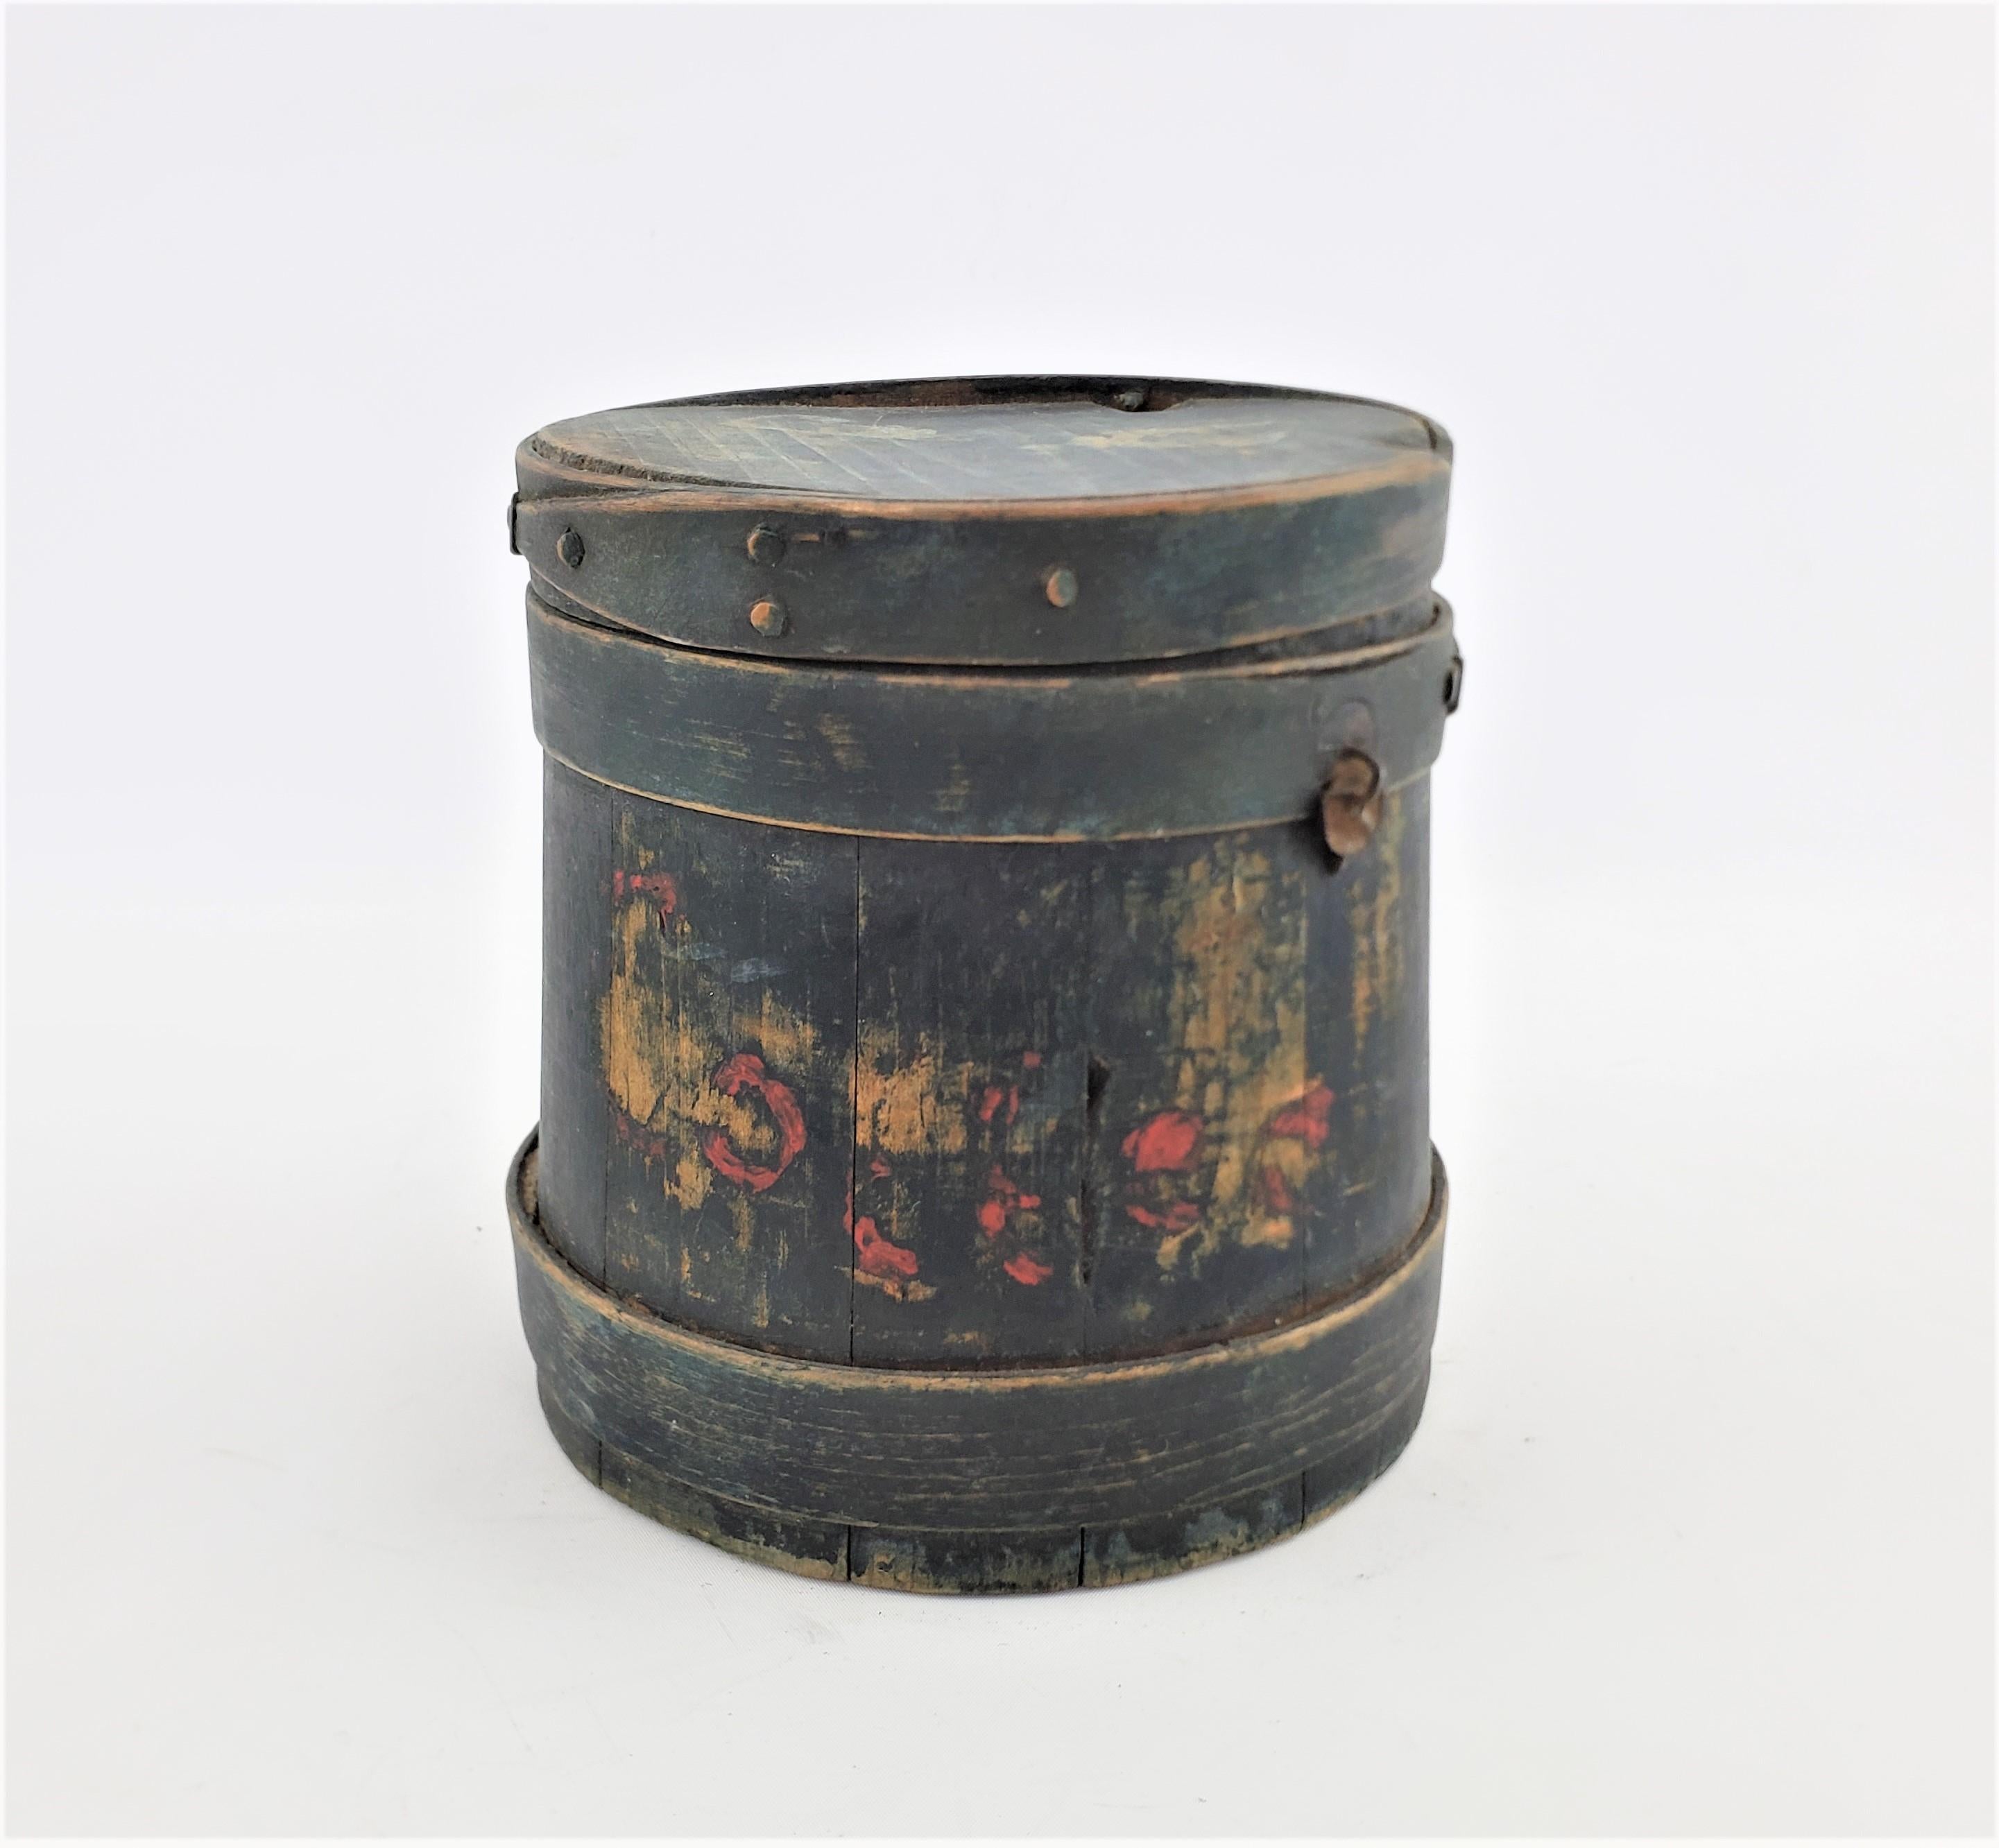 This folk art finger staved covered sugar bucket or firkin shows no indication of a specific maker, or country of origin. We presume this covered bucket originated from Europe, possibly Dutch or English and dates to approximately 1900-1920. The